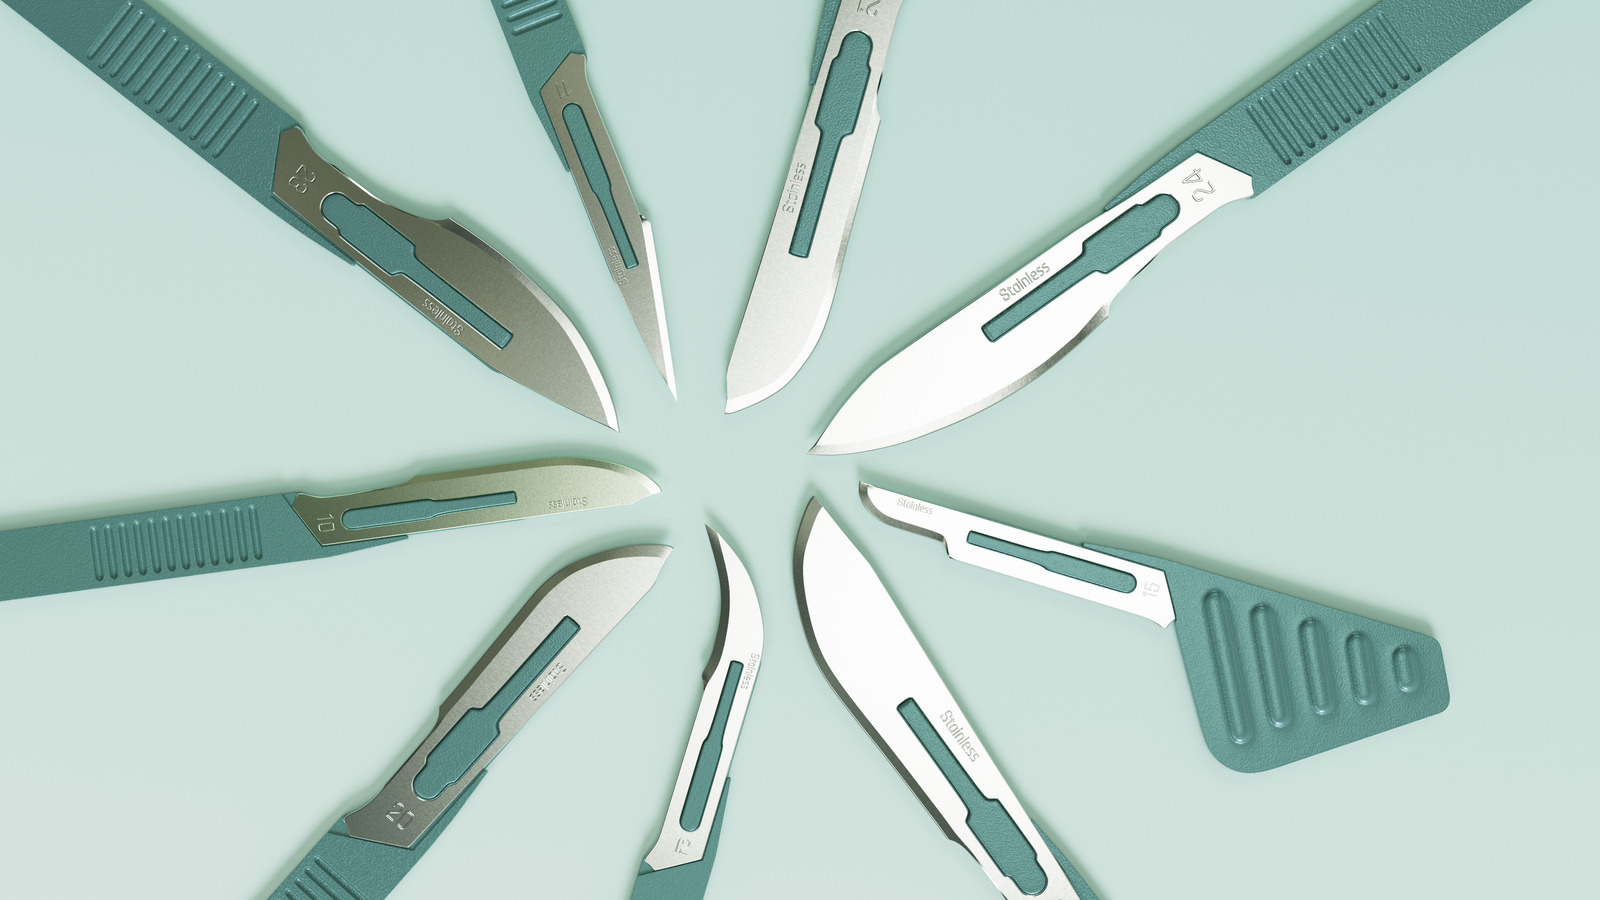 Scalpels: How do you use scalpel blades and what types are there?